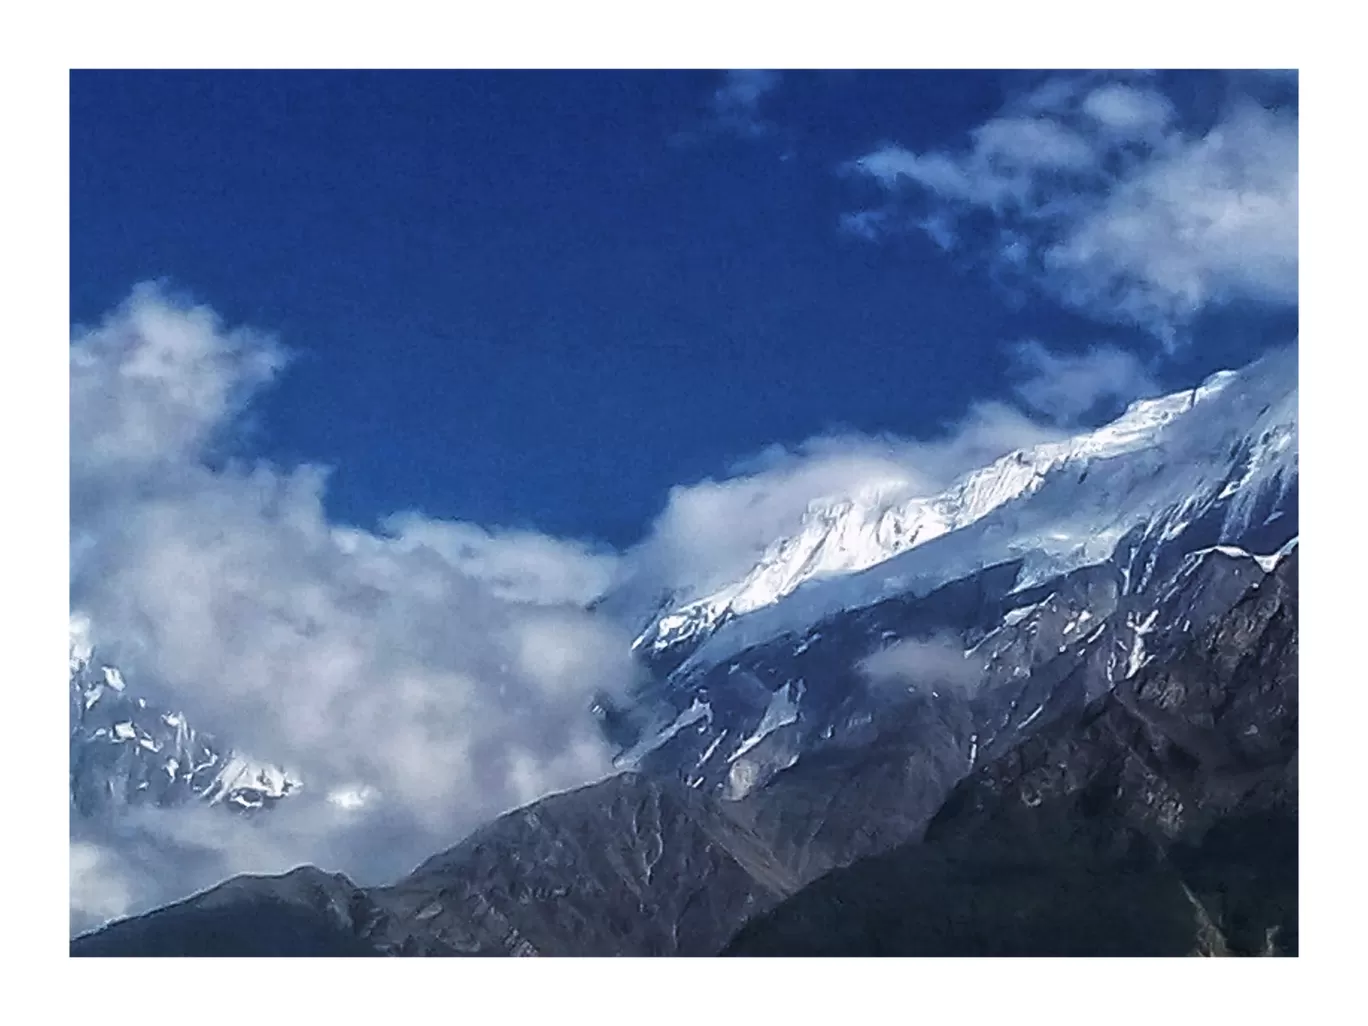 Photo of Jomsom By Dhairya Jaiswal